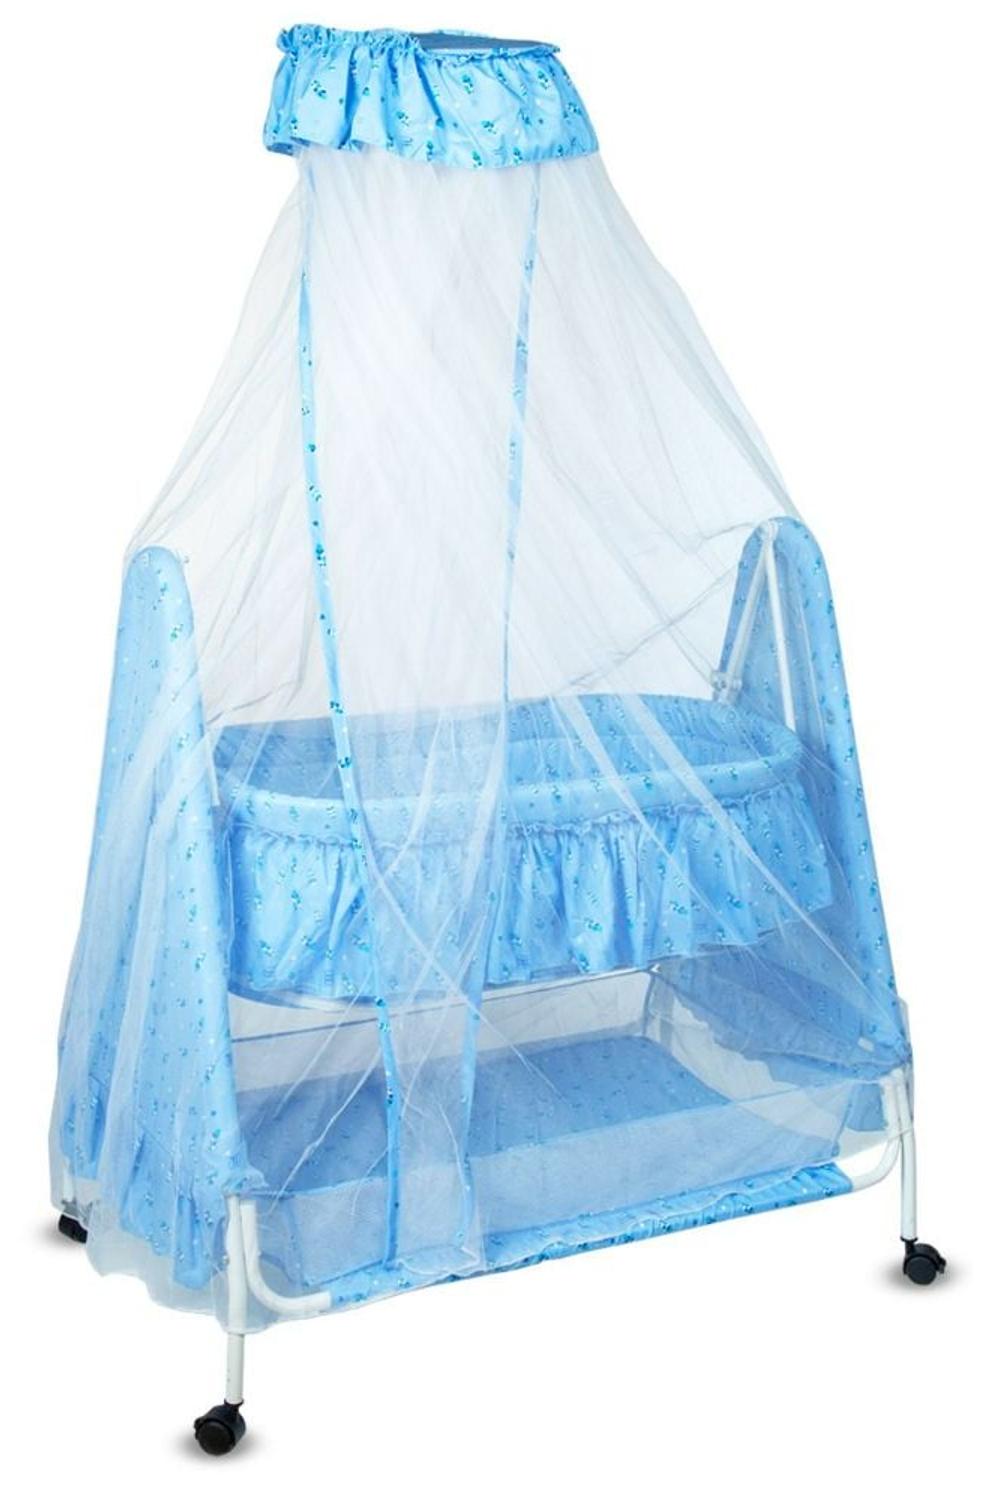 Mee Mee Spacious Swinging Baby Cradle with Mosquito Net (Blue)